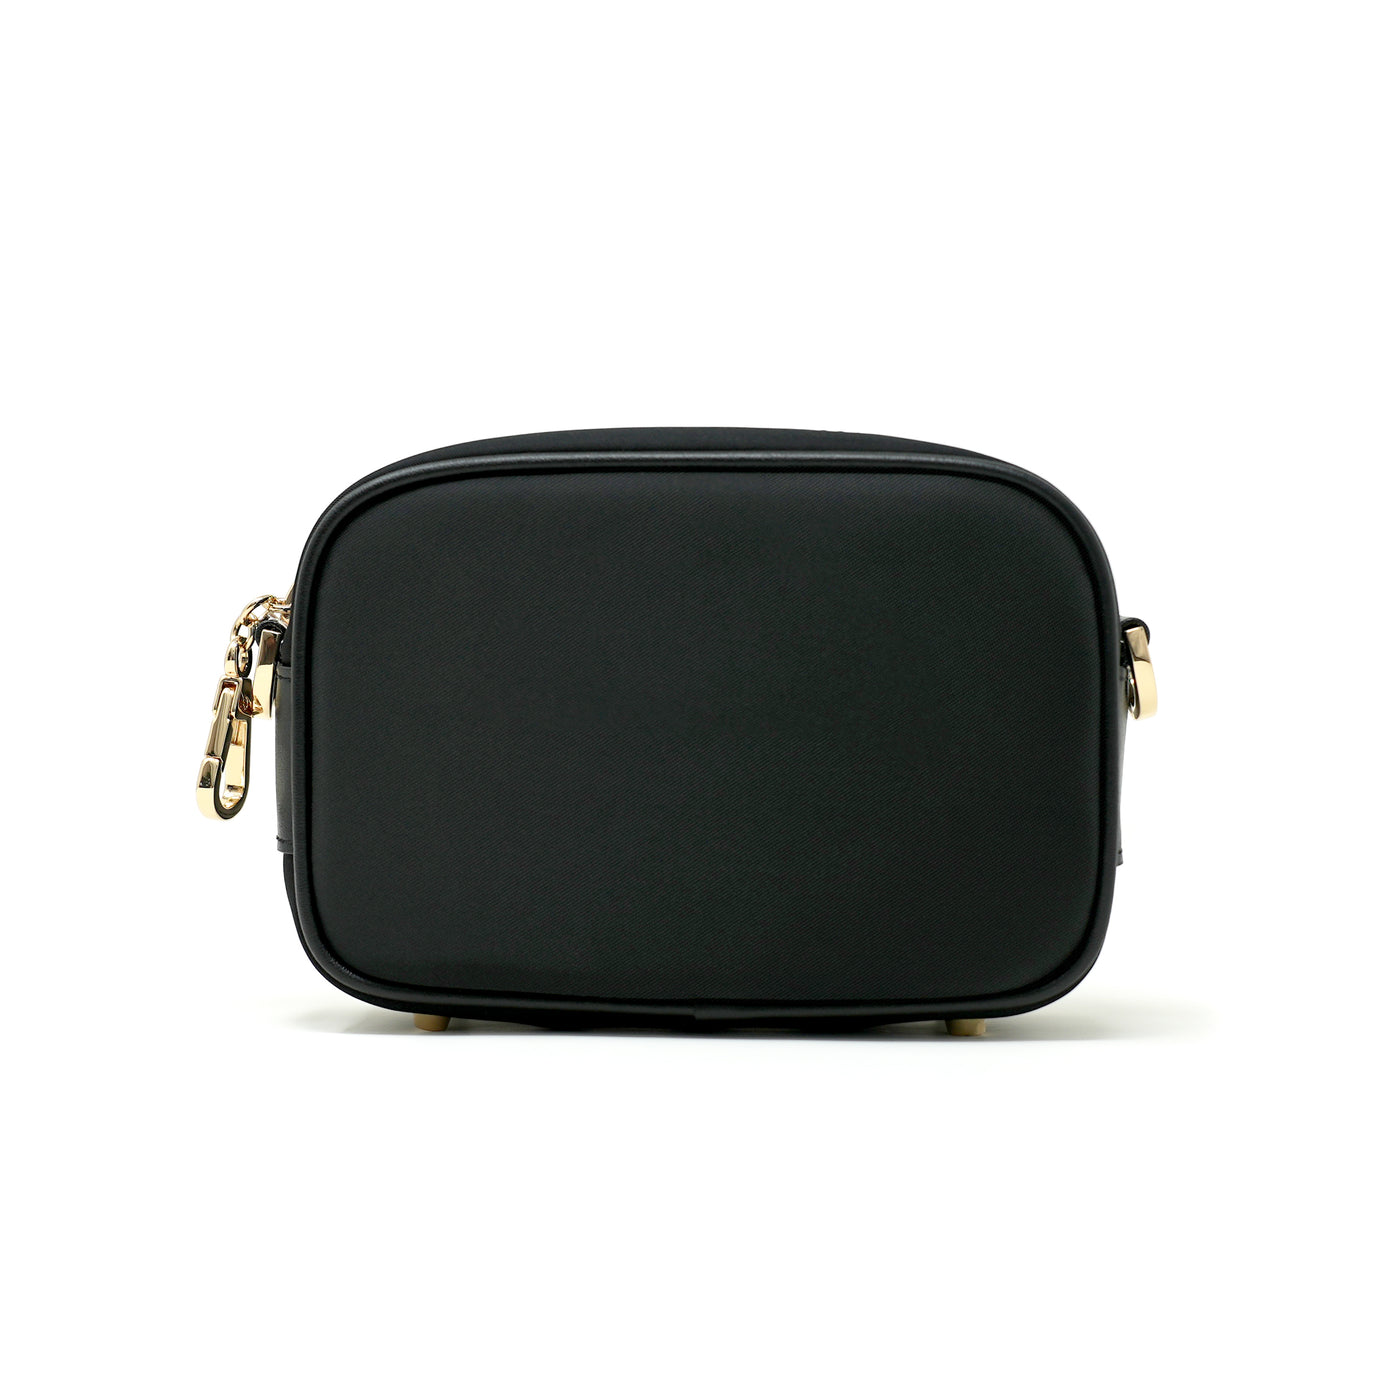 Anti-theft Water-resistant Travel Crossbody - Crissy Mini Crossbody in Black Gold - back view - Arden Cove